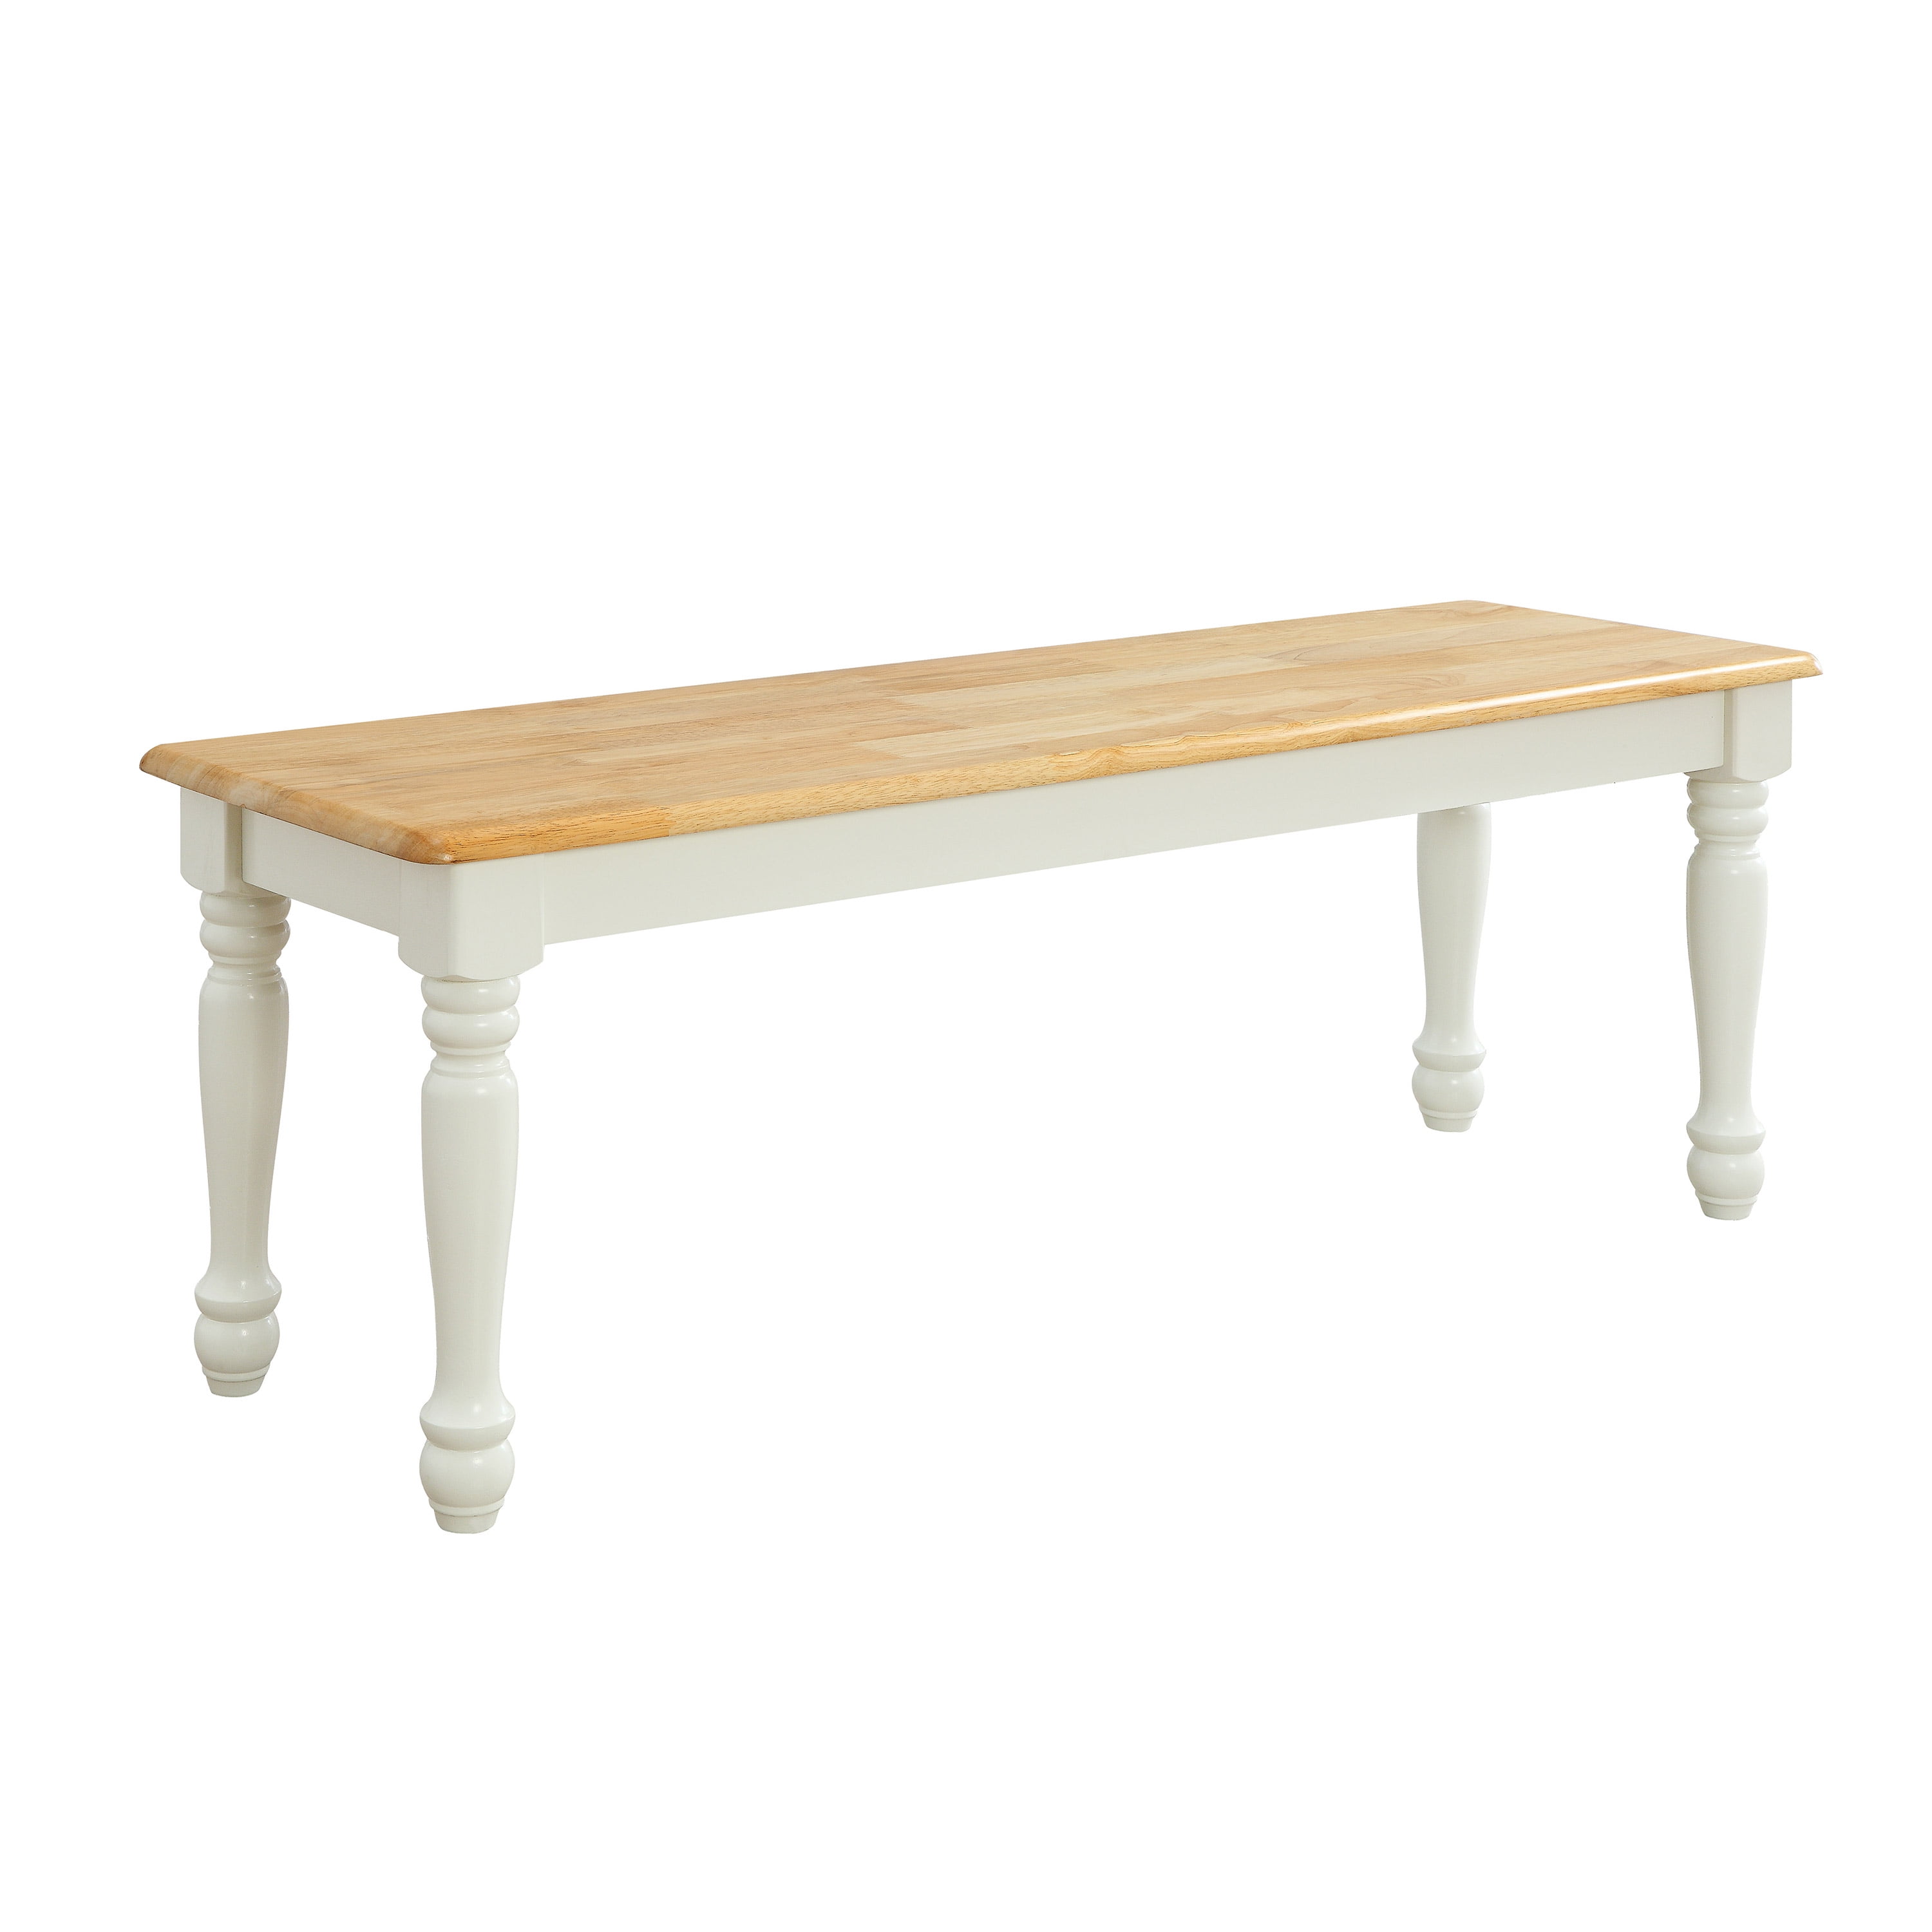 Farmhouse Kitchen Dining Bench Rustic Solid Wood Seat Hall Entryway Natural New 